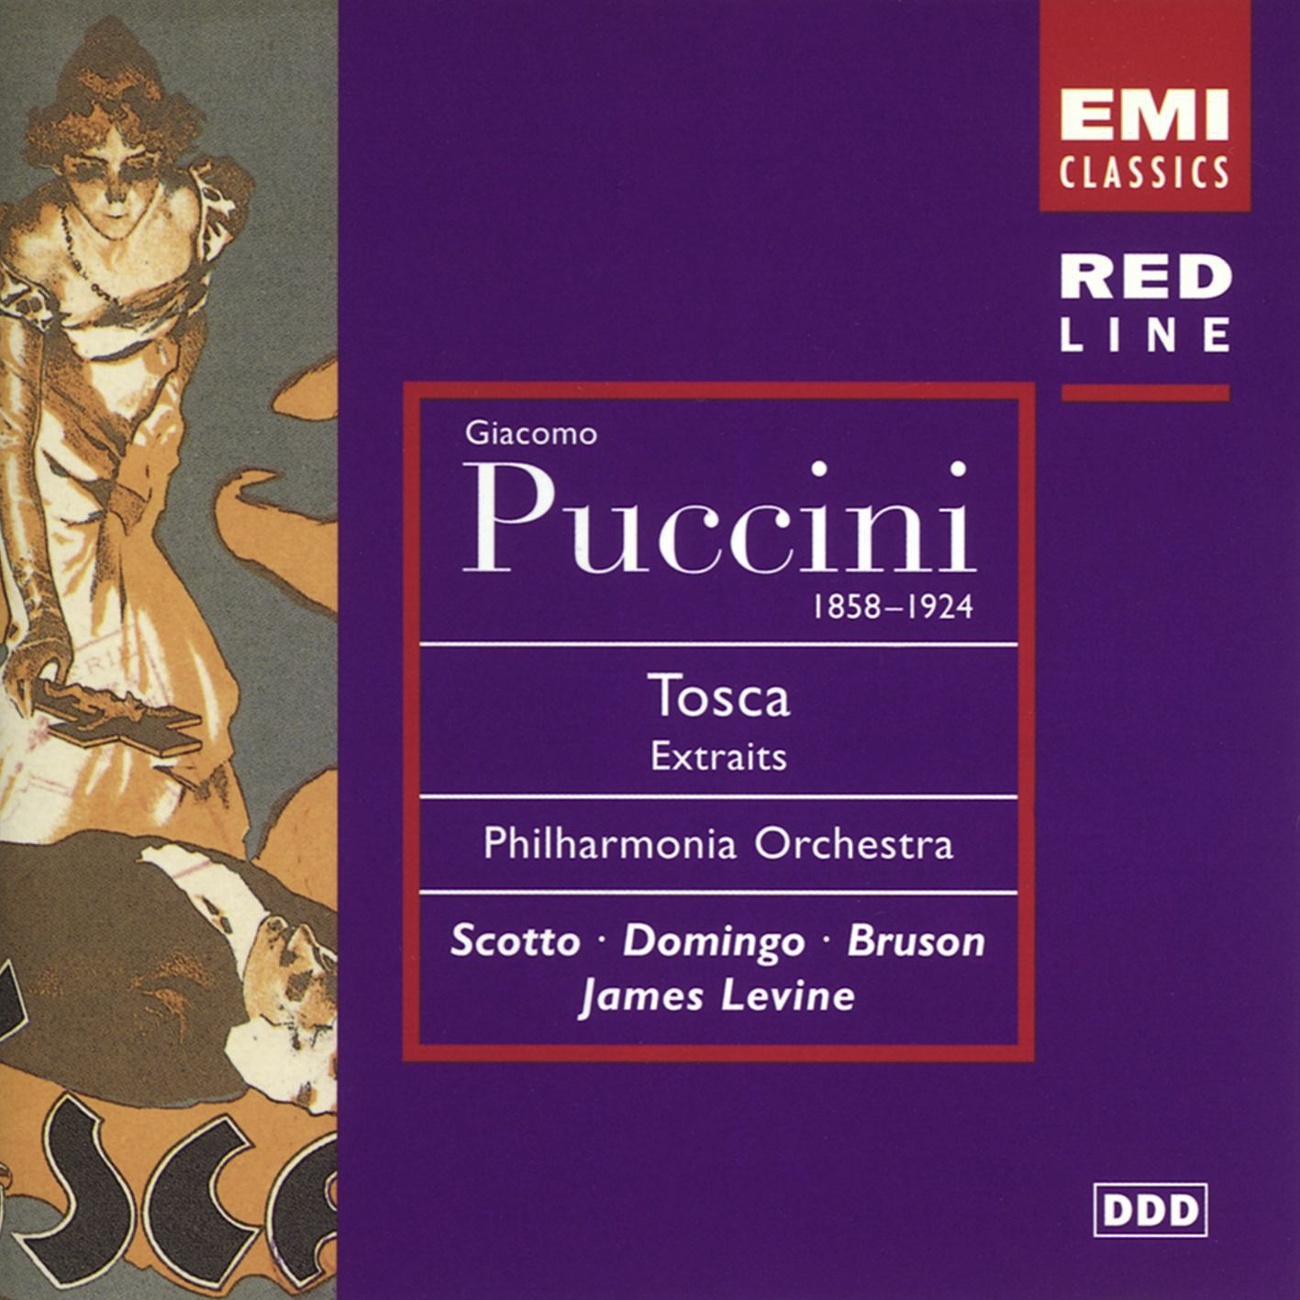 Tosca - Opera in three acts (1997 Digital Remaster), Act III: E lucevan le stelle (Cavaradossi)